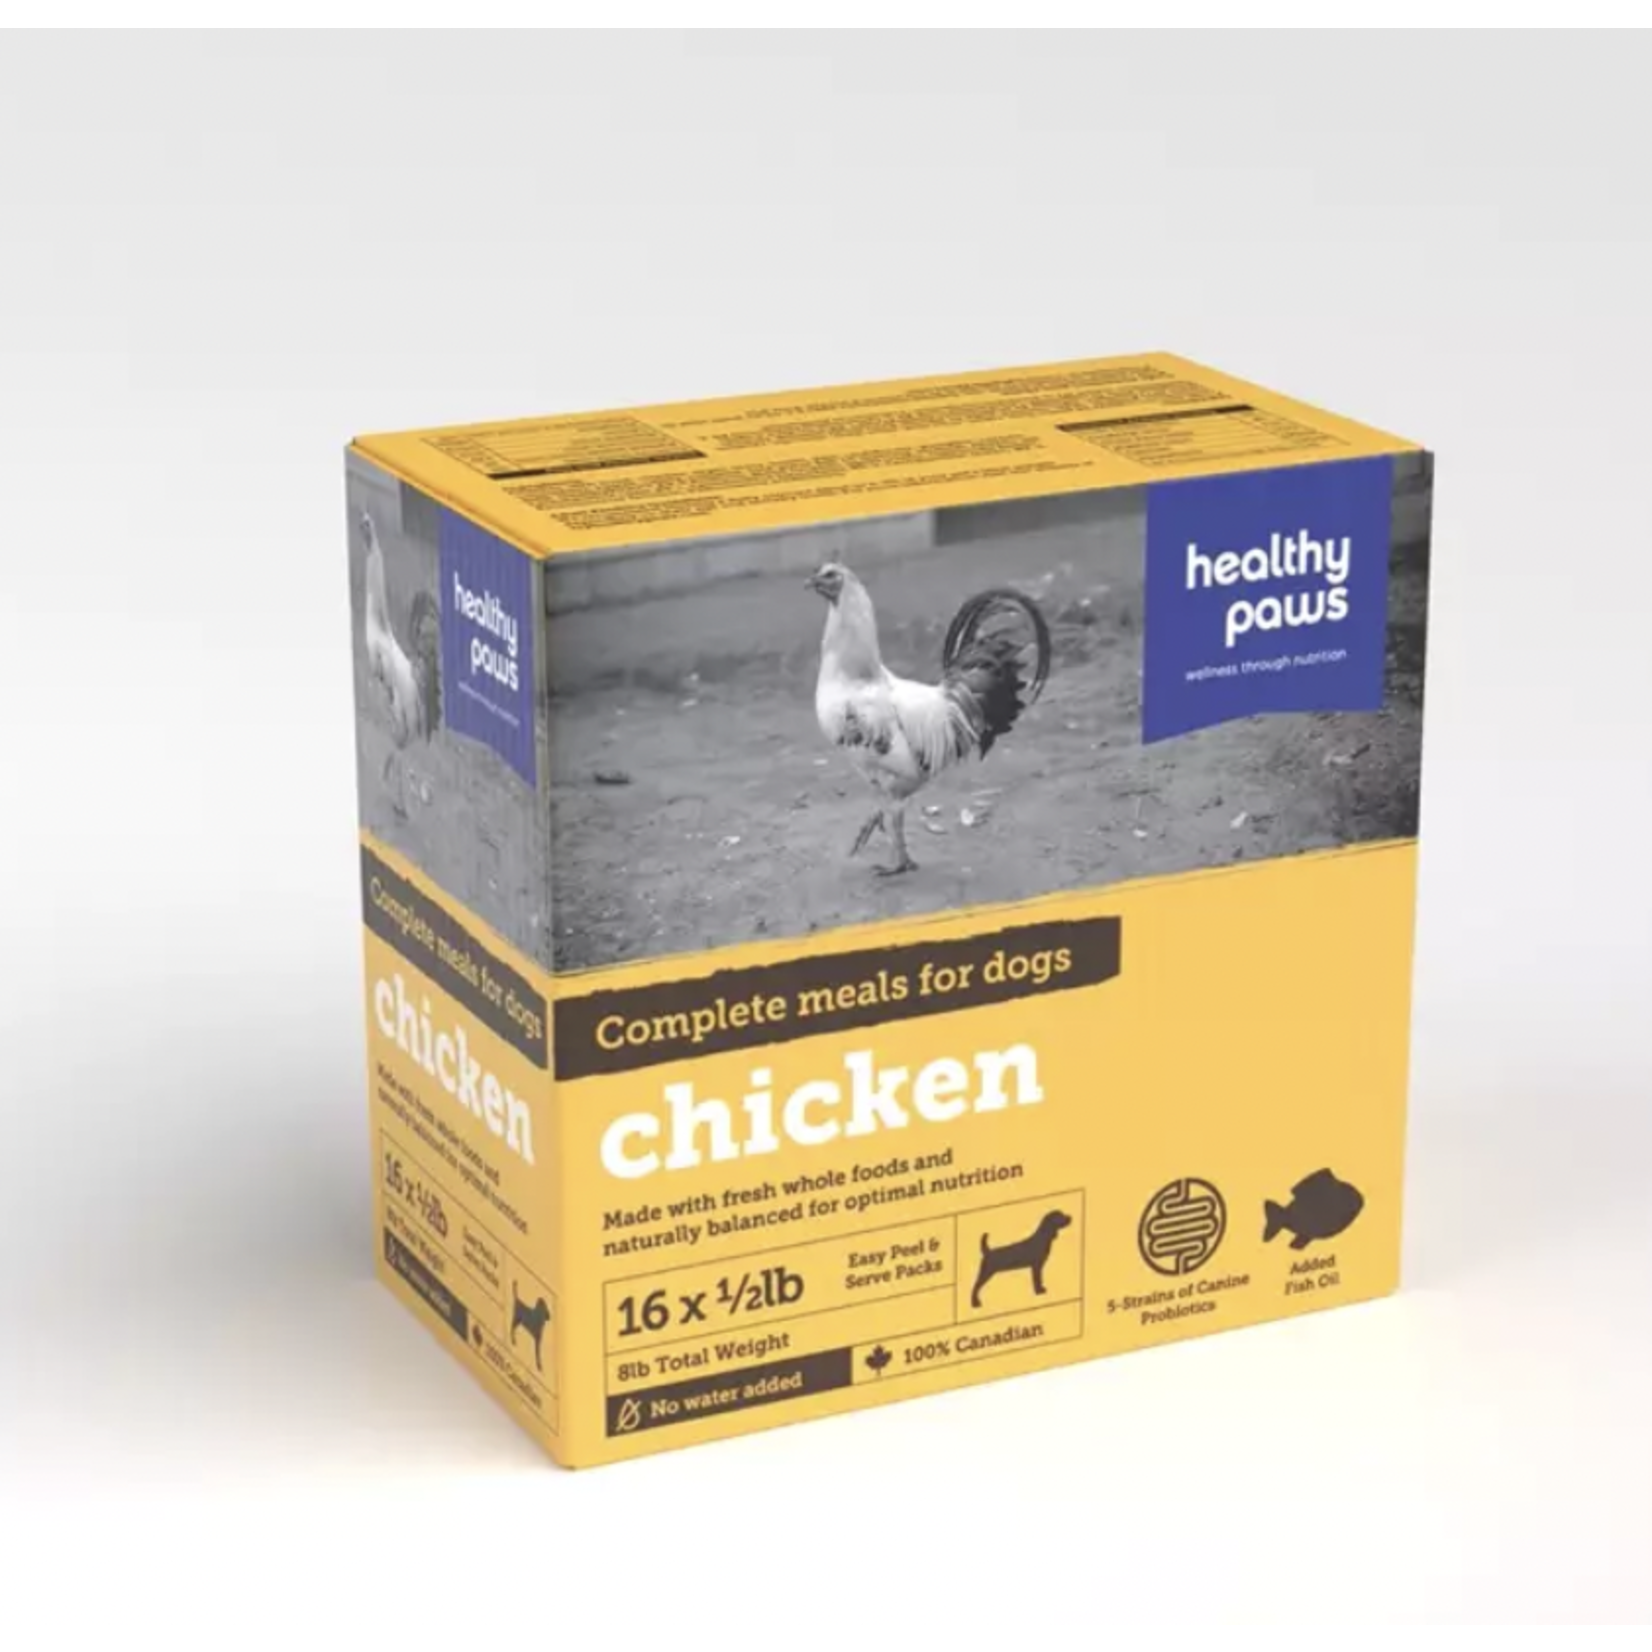 HEALTY PAWS Healthy Paws Canine Complete Dinner Chicken 16 x 1/2 lb